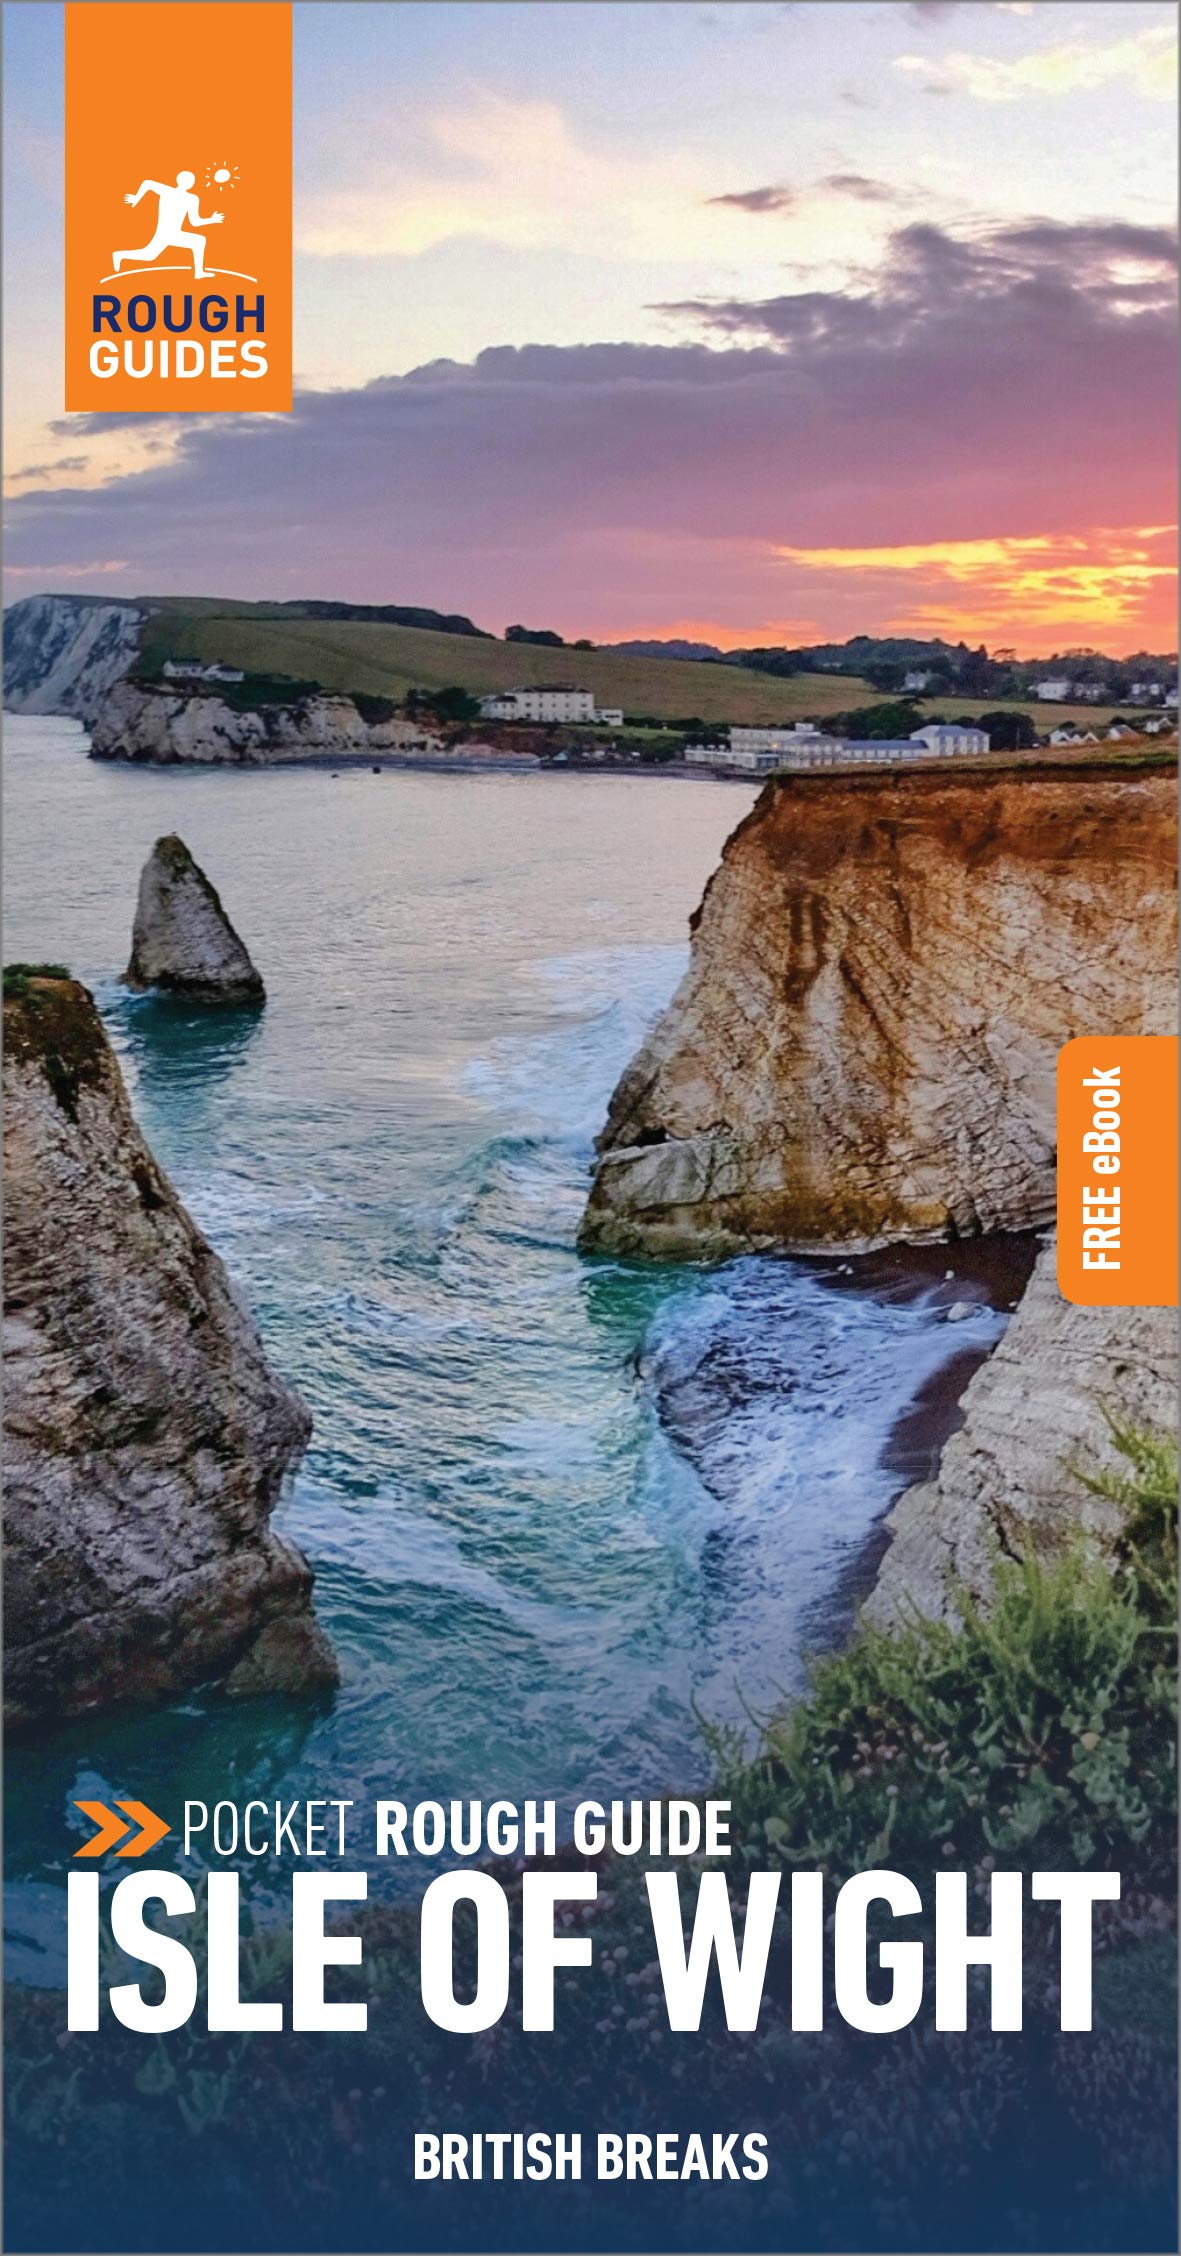 Pocket Rough Guide to the Isle of Wight